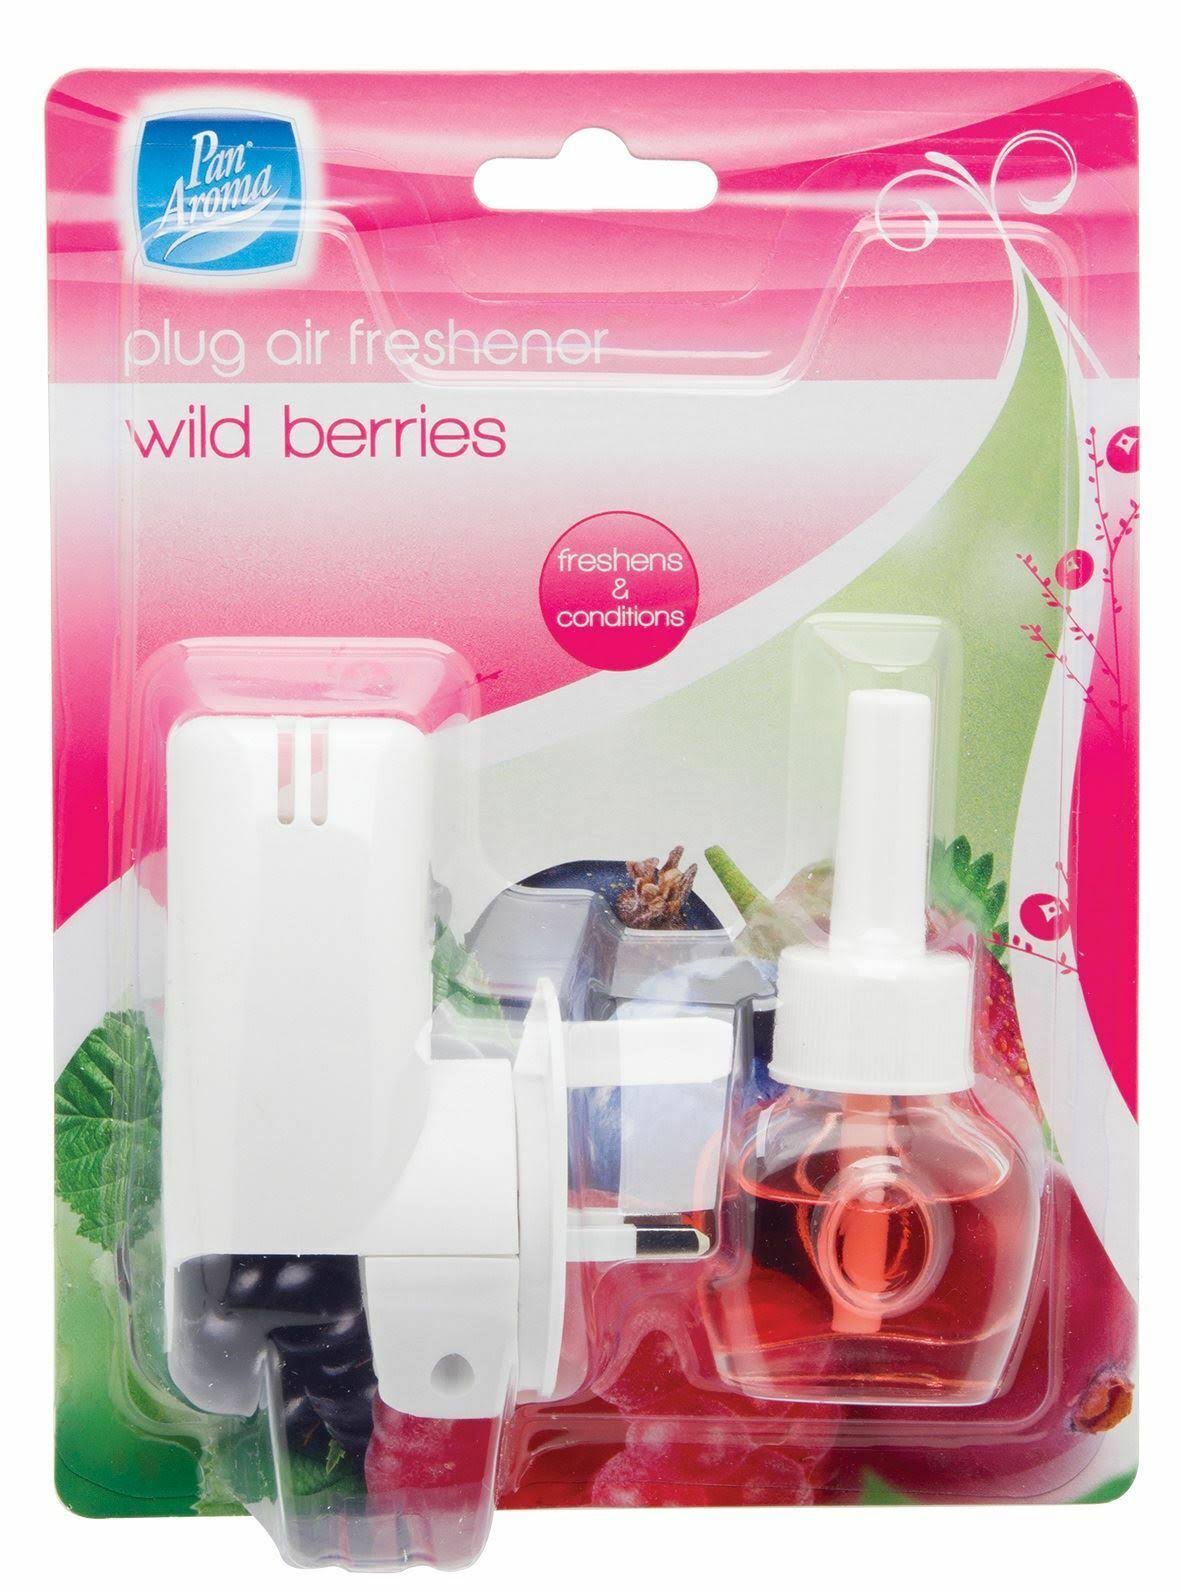 Pan Aroma Electrical Plug Air Fresheners Wild Berries Lasts up to 30 days